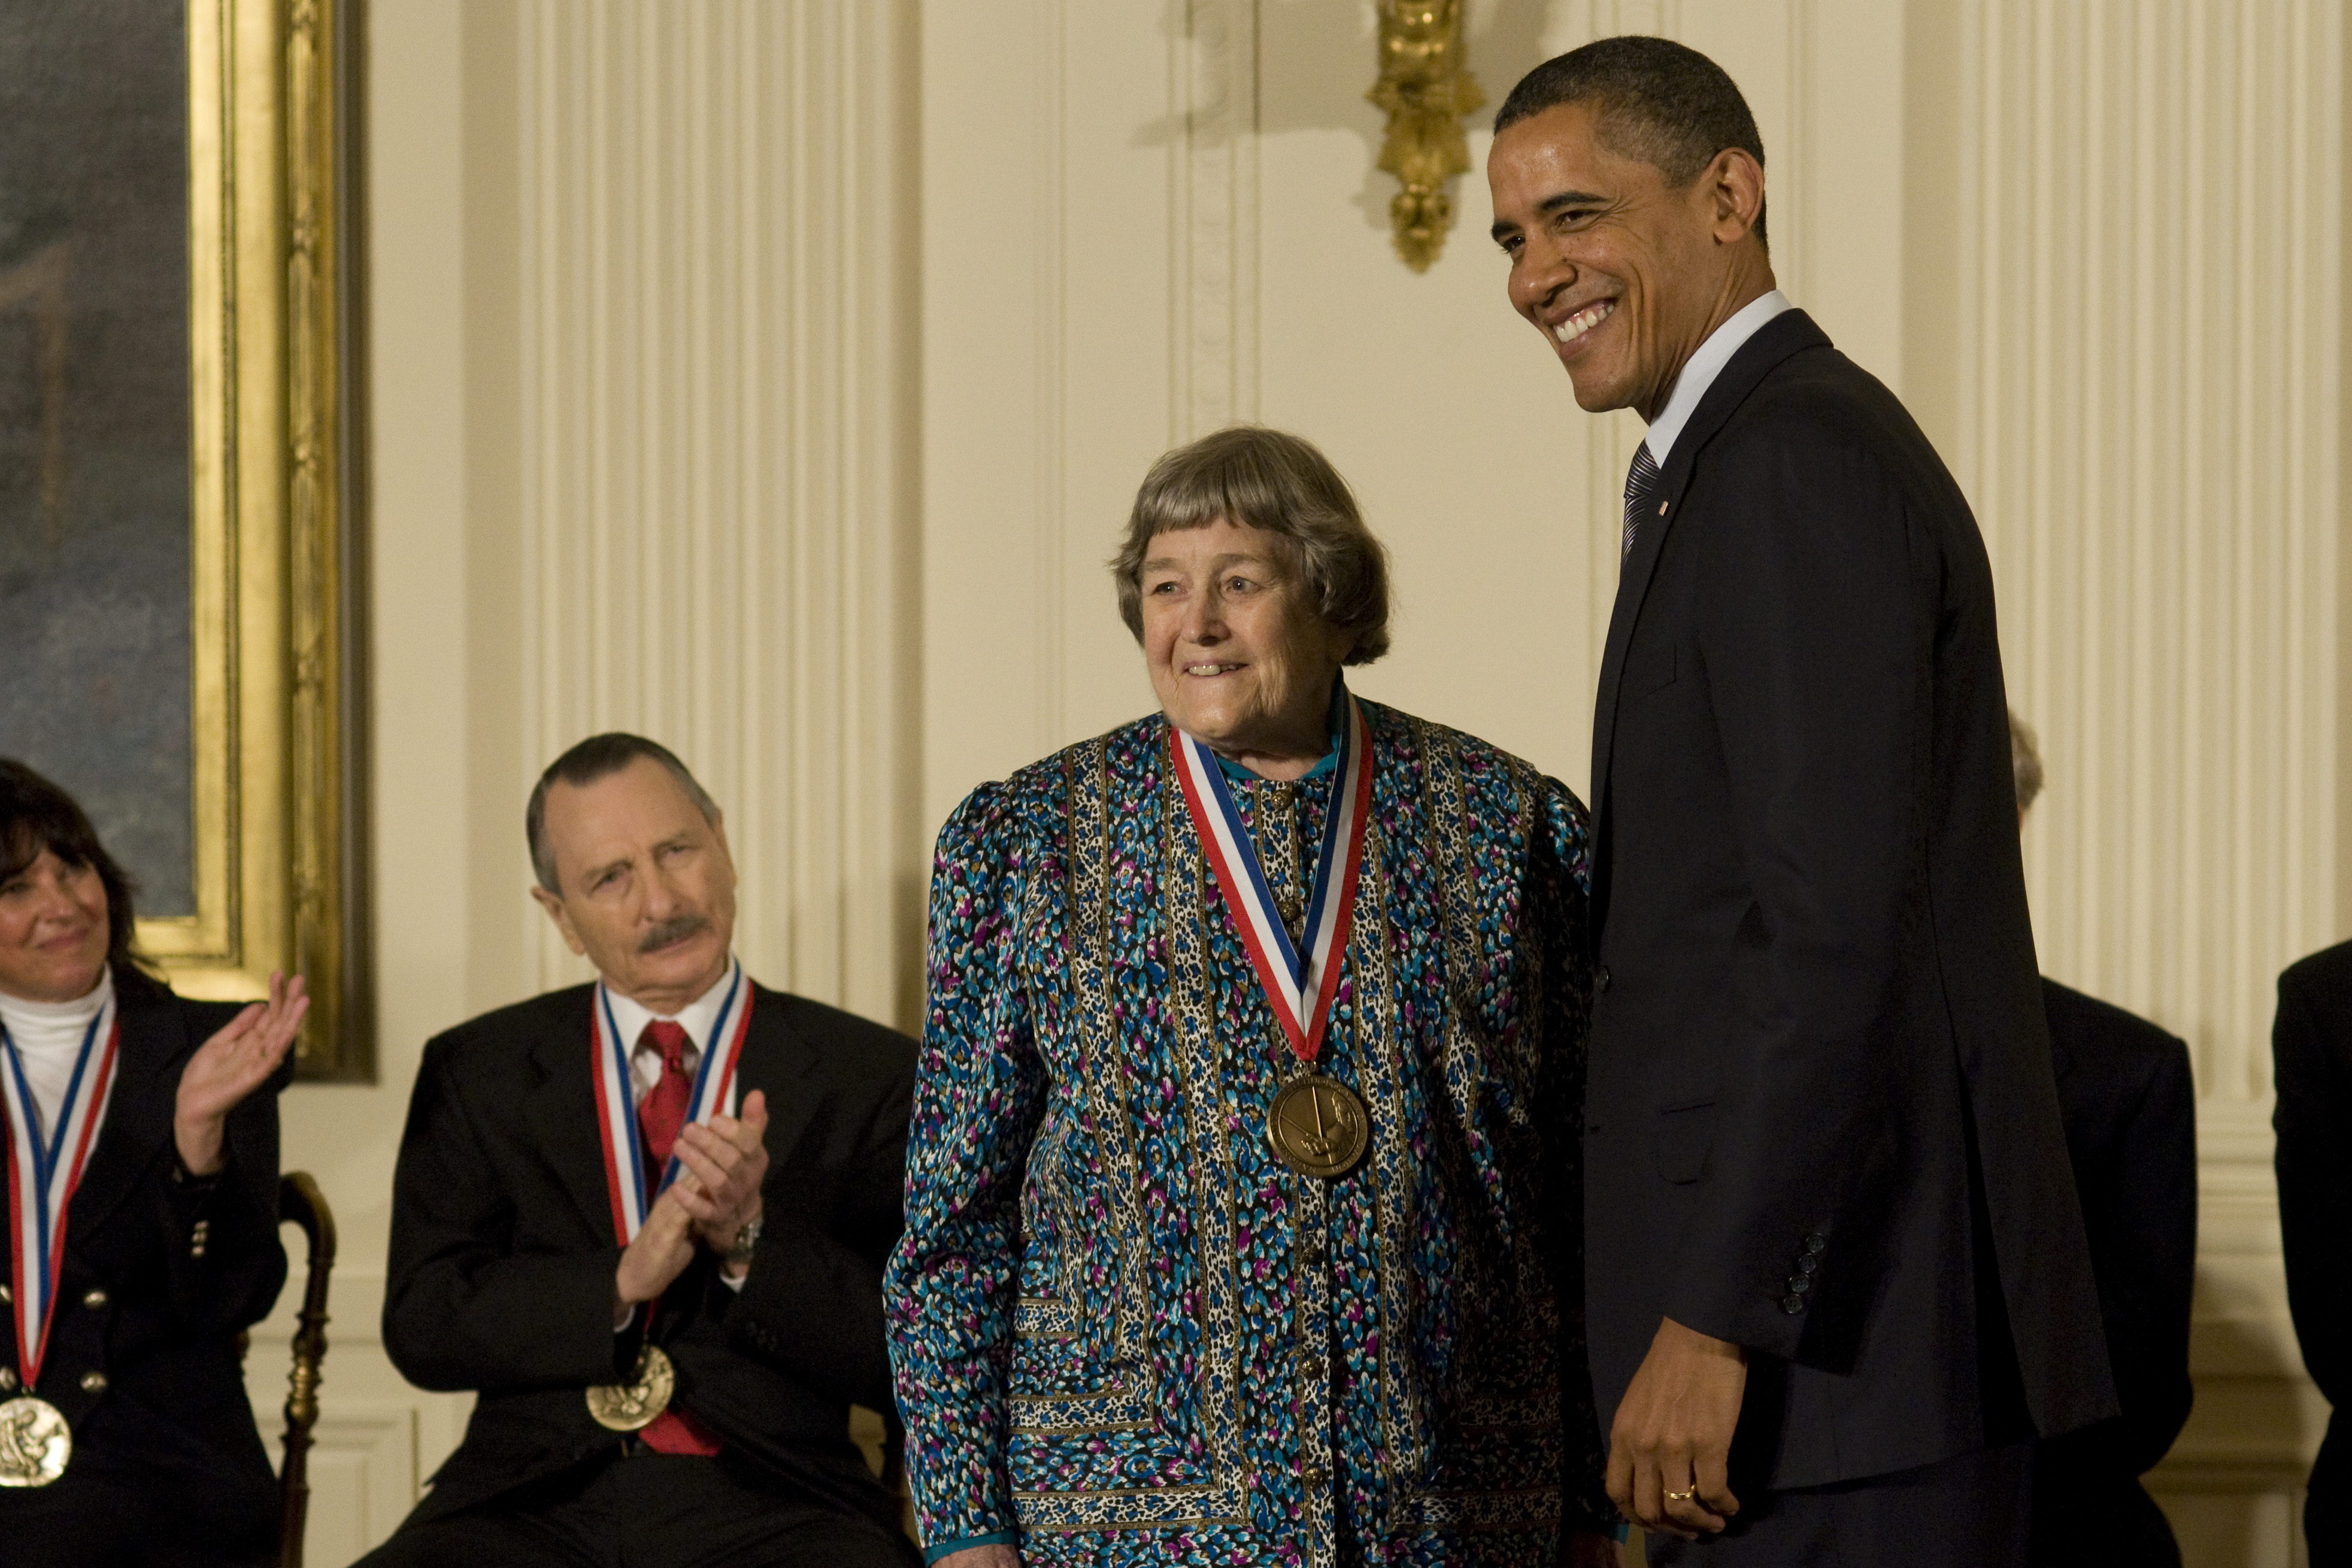 Yvonne Brill receiving the National Medal of Technology and Innovation in 2010 from President Obama.